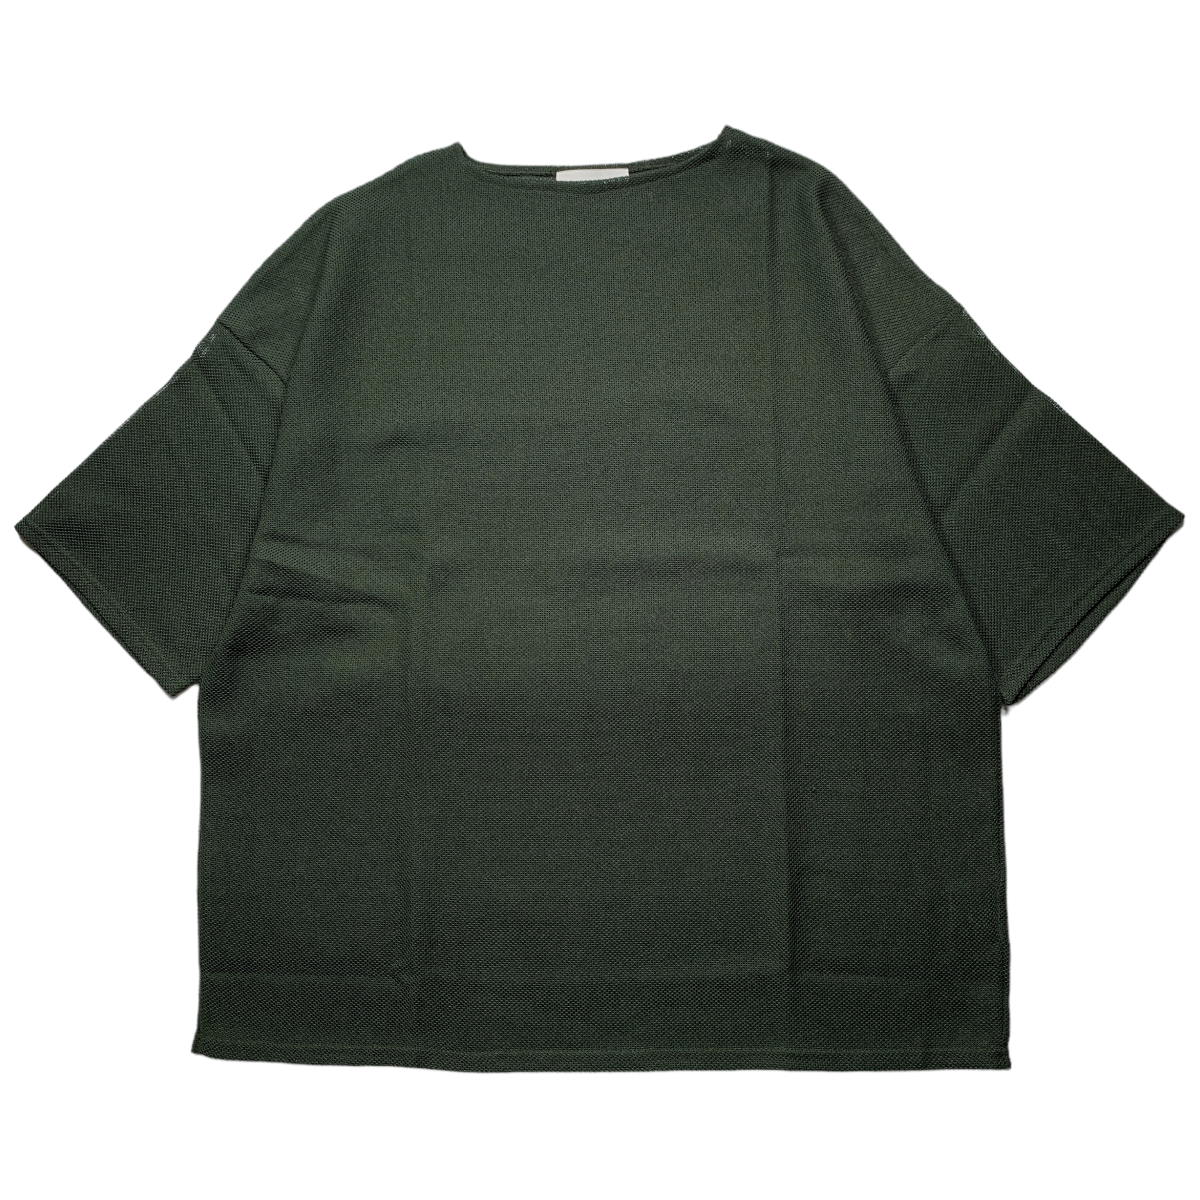 marka <BR>BOAT NECK - ORGANIC COTTON  RECYCLE POLYESTER RASCHEL -(GREENSAGE)